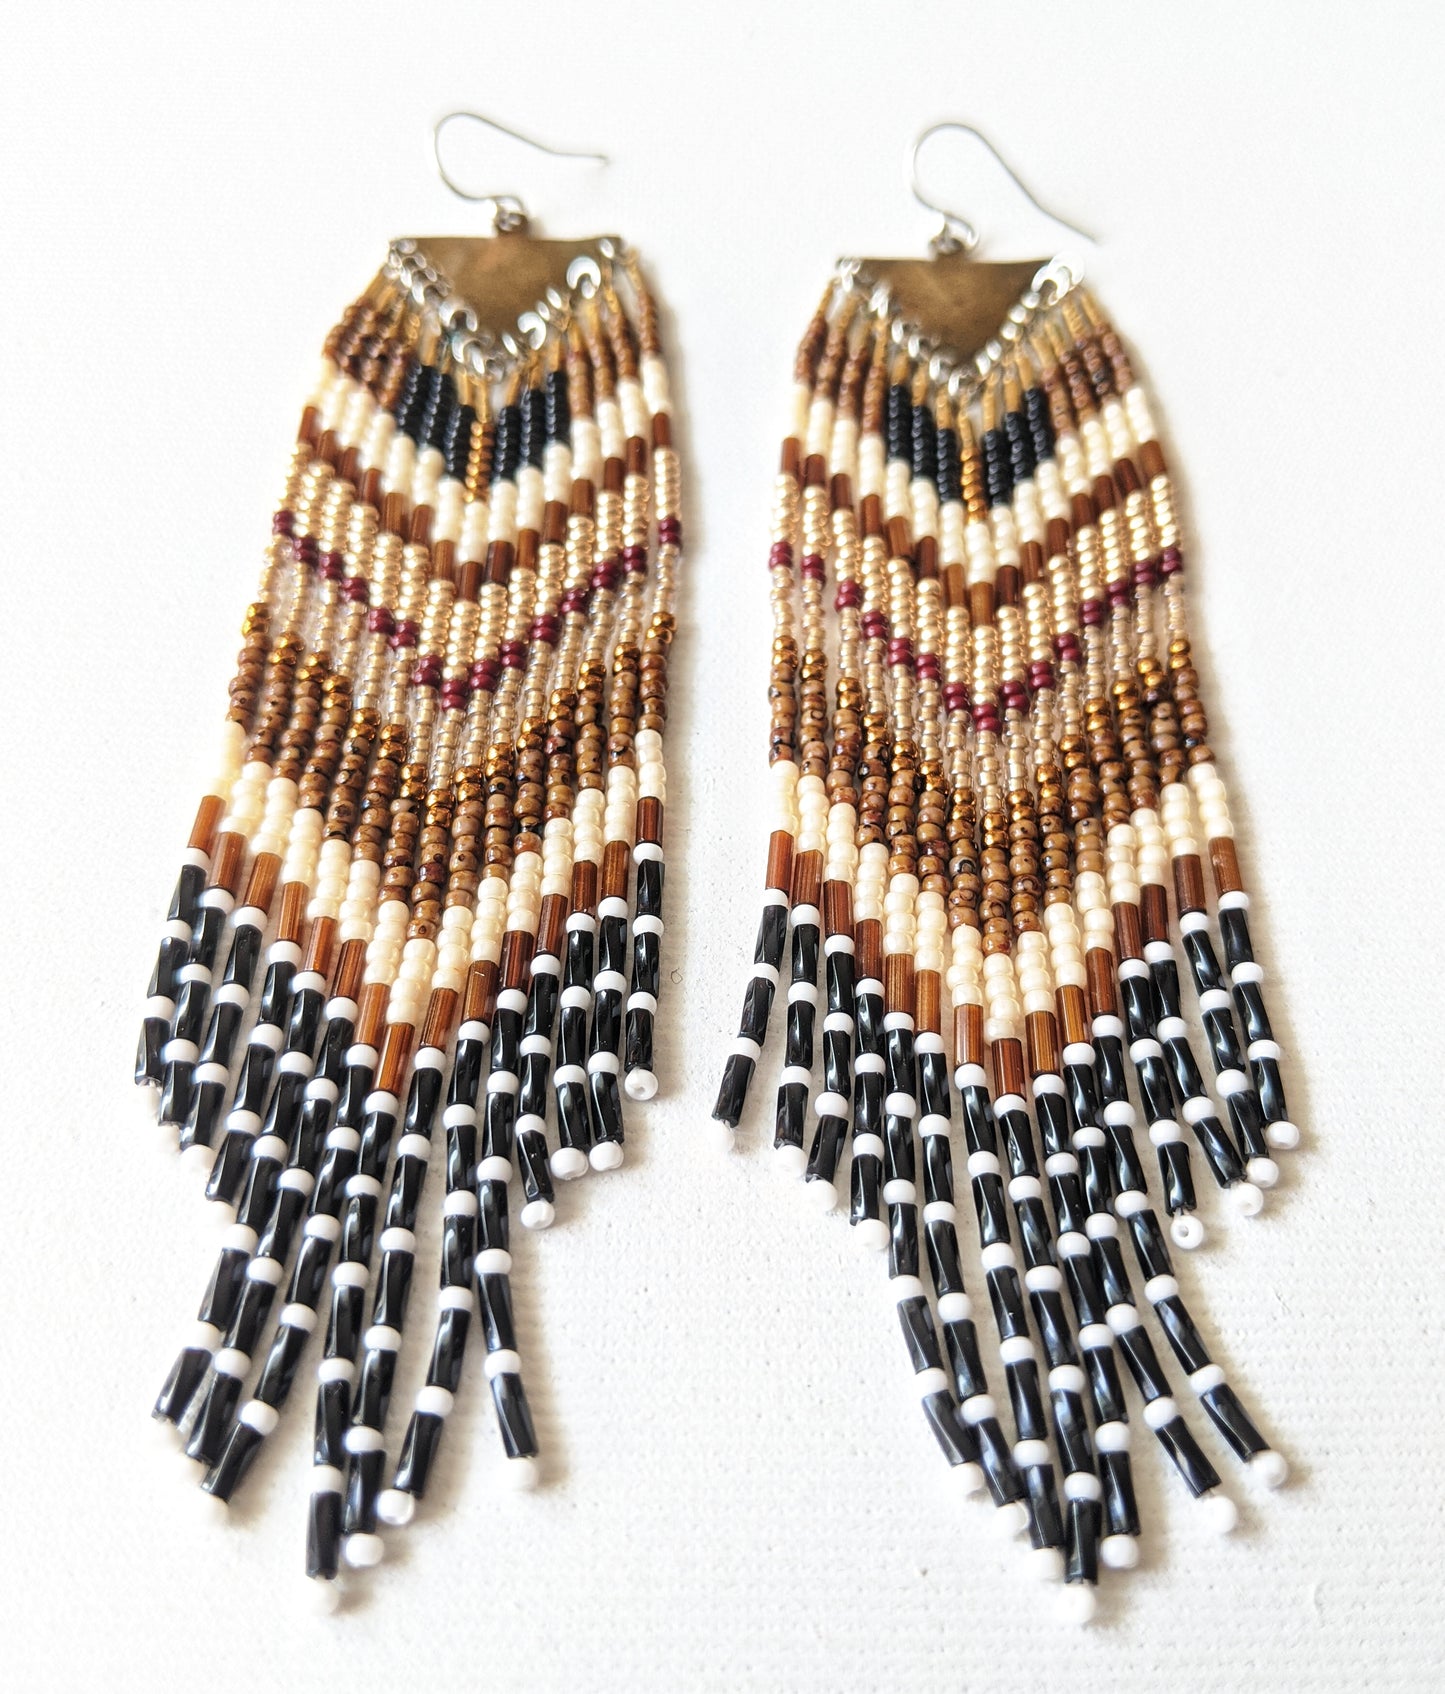 Moon & Milk - Golden brown beaded fringe earrings handmade with glass beads, sterling silver, and brass.